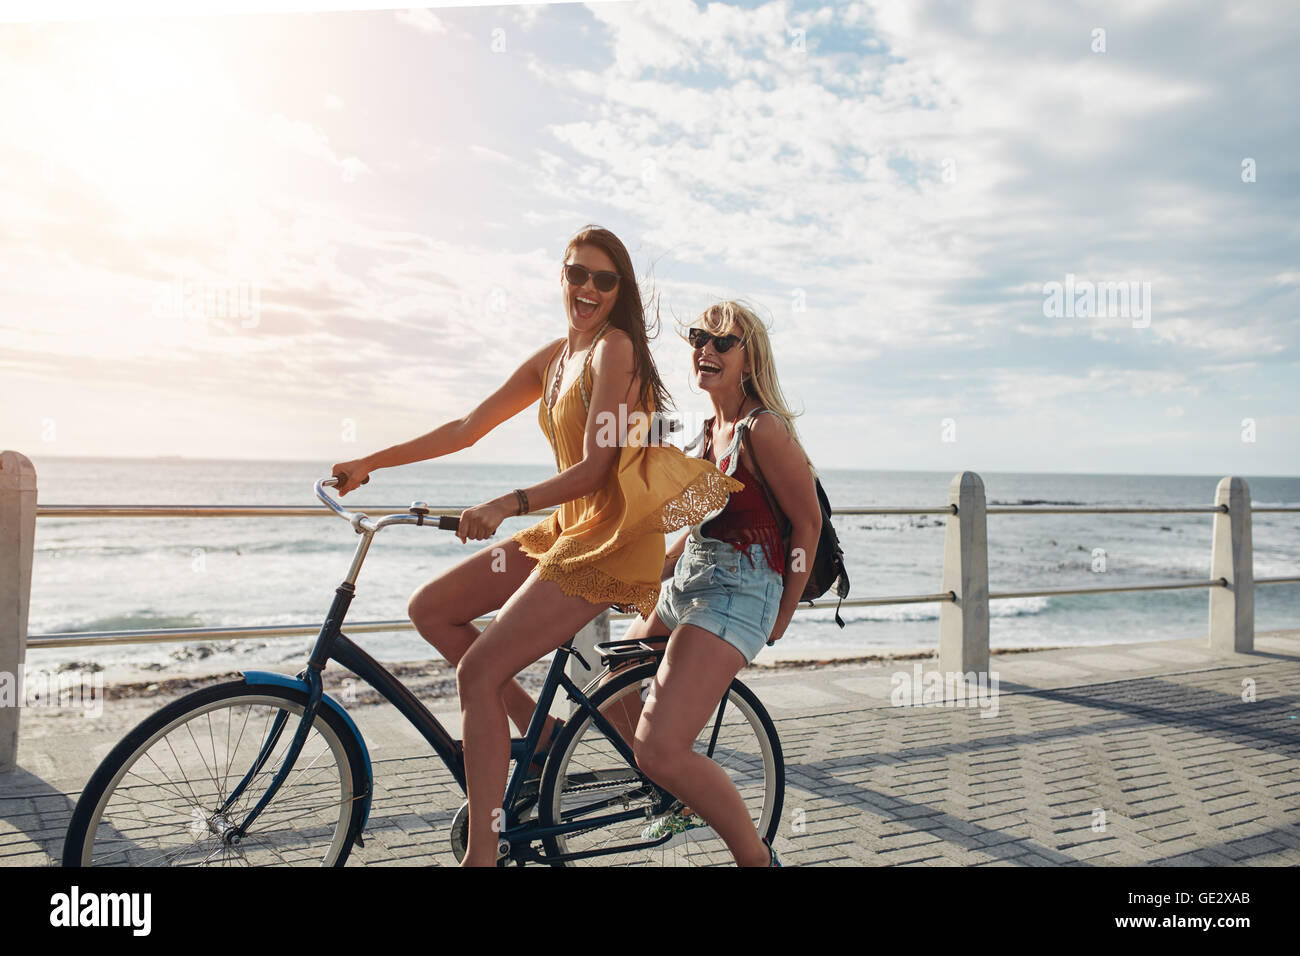 Two cheerful young female friends on a bicycle. Best friends enjoying a bike ride on a sunny day at the seaside promenade. Stock Photo